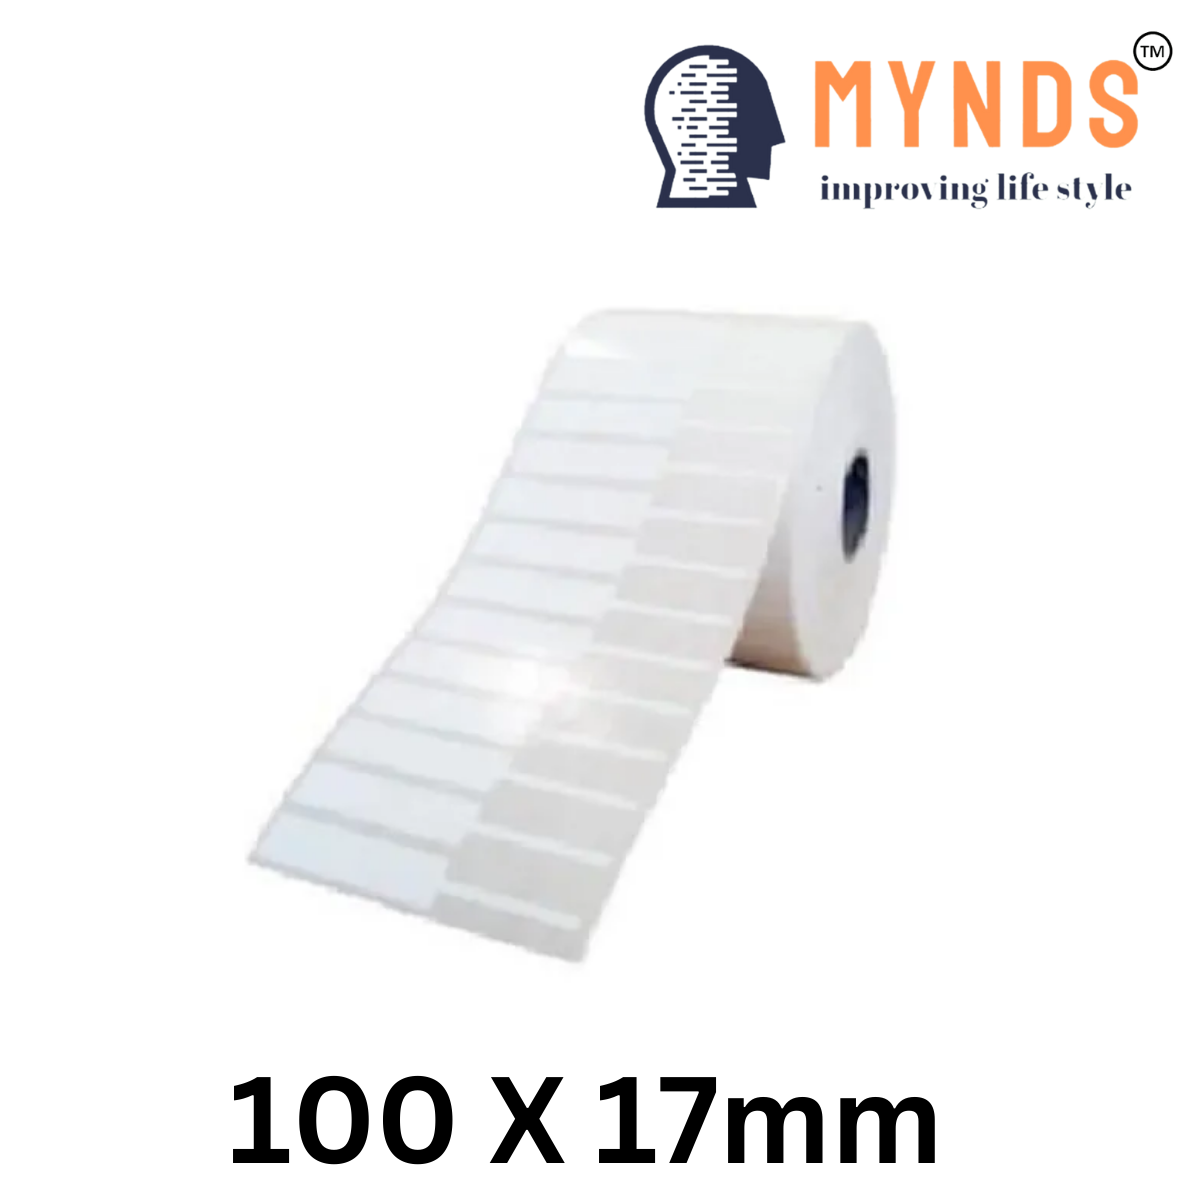 100 x 17mm Direct thermal Label by MYNDS